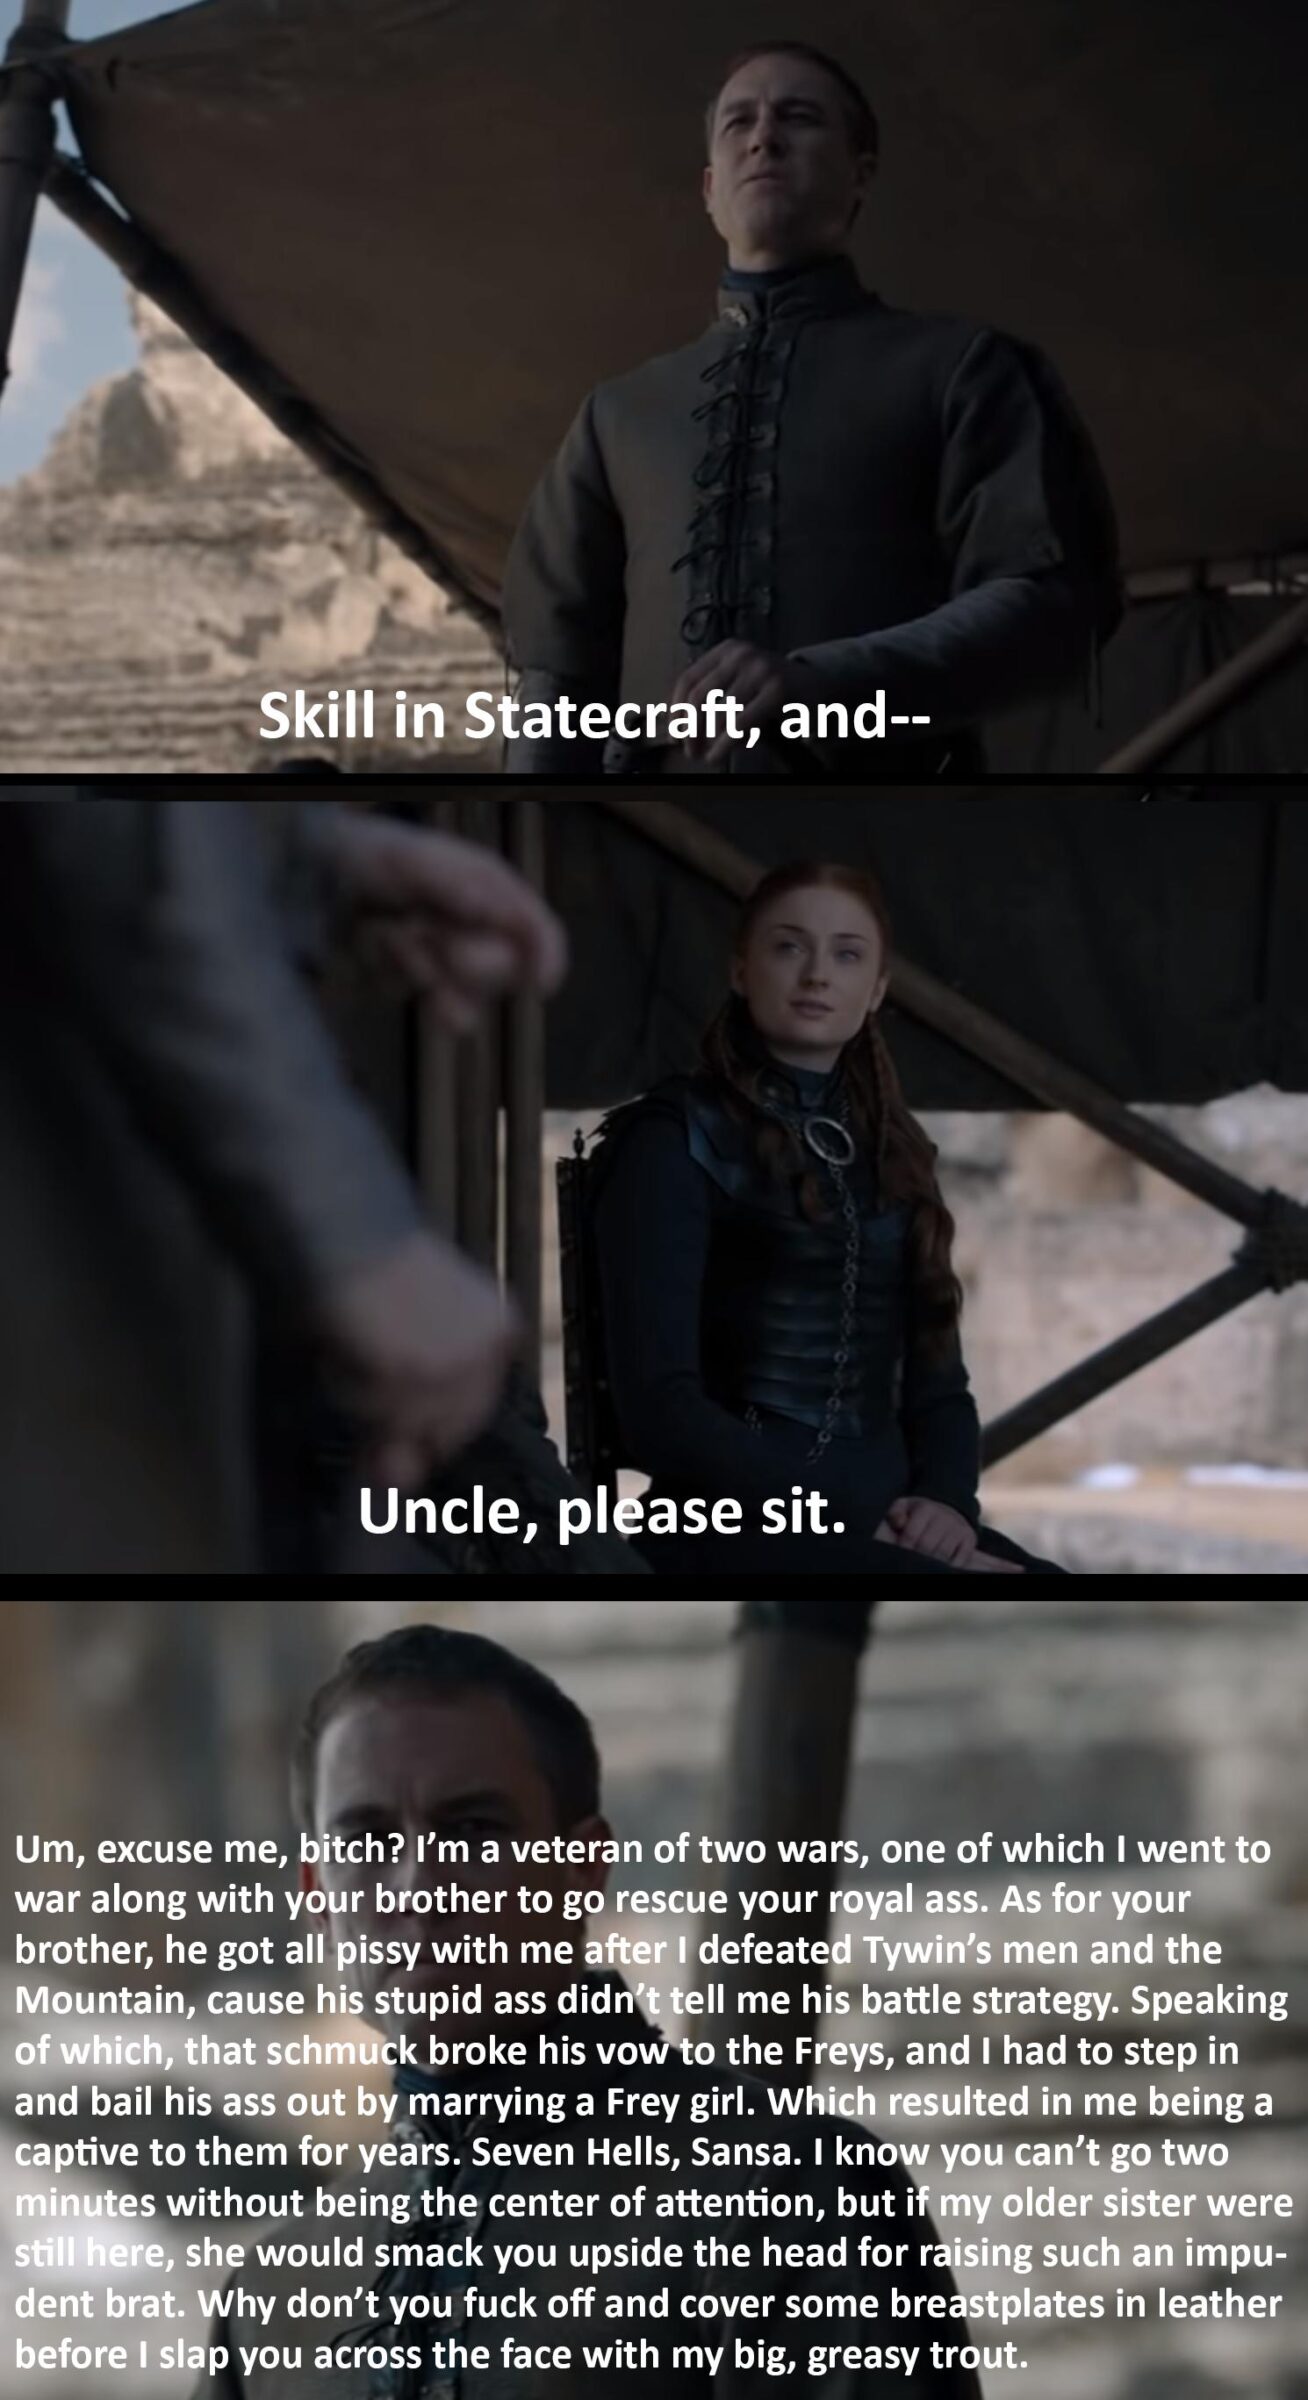 Game of thrones, Sansa, Bran, Edmure, North, Jon Game of thrones memes Game of thrones, Sansa, Bran, Edmure, North, Jon text: ZZ+?SSkill in Statecraft, and-- Uncle, please sit. Um, excuse me, b!tch? I'm a veteran of two wars, one of which I went to war along with yå:r brother to go rescue your royal ass. As for your brother, he got all bissy with me fier I defeated Tywin's men and the Mountain, cause his stupid ass didn tell me his battle strategy. Speaking of which, that schm kbroke his vo o the Freys, and I had to step in and bail his ass out by marrying a Frey girl. Which resulted in me being a captive to them for years. Seven Hells, Sansa. I know you can't go two minutes without being the center of attention, but i y older sister were still here, she would smack you upside the head for r •sing such an impu- dent brat. bihy don't you fuck off and cover some bre stplates in leather before I slap you across the face with my big, greasy trout. 